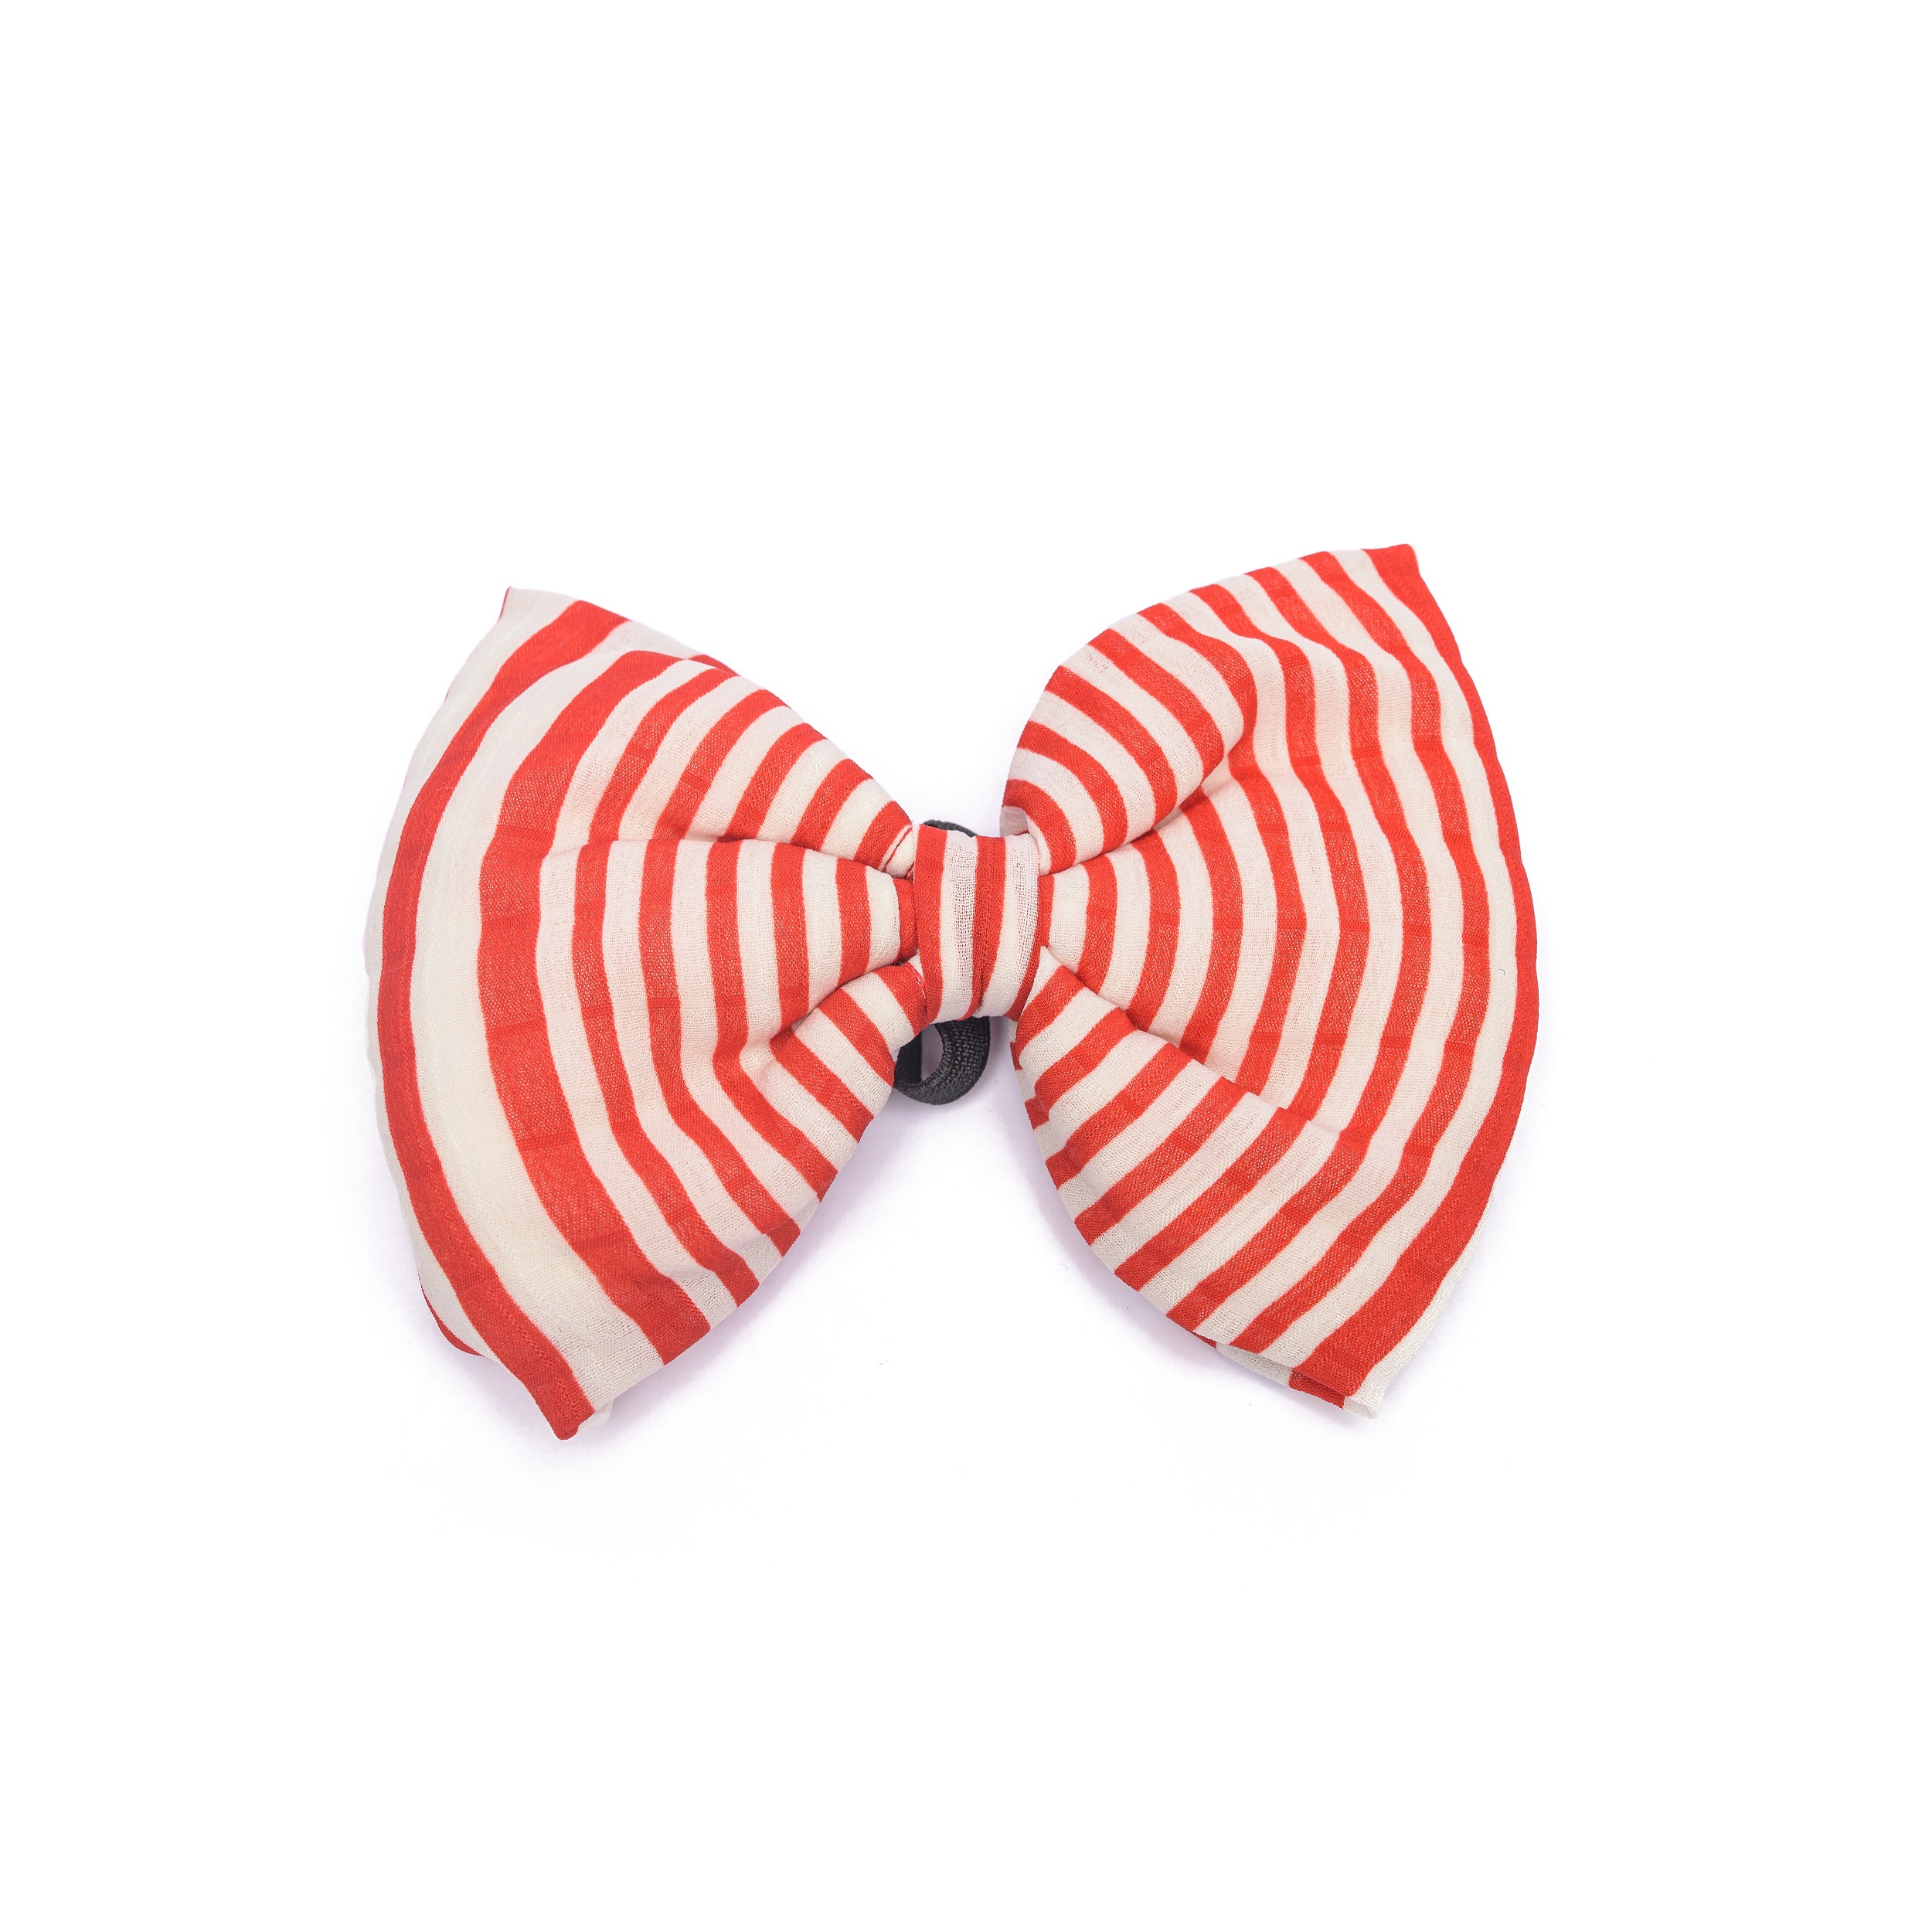 PetWale Bow-tie for Dogs - Red Stripes